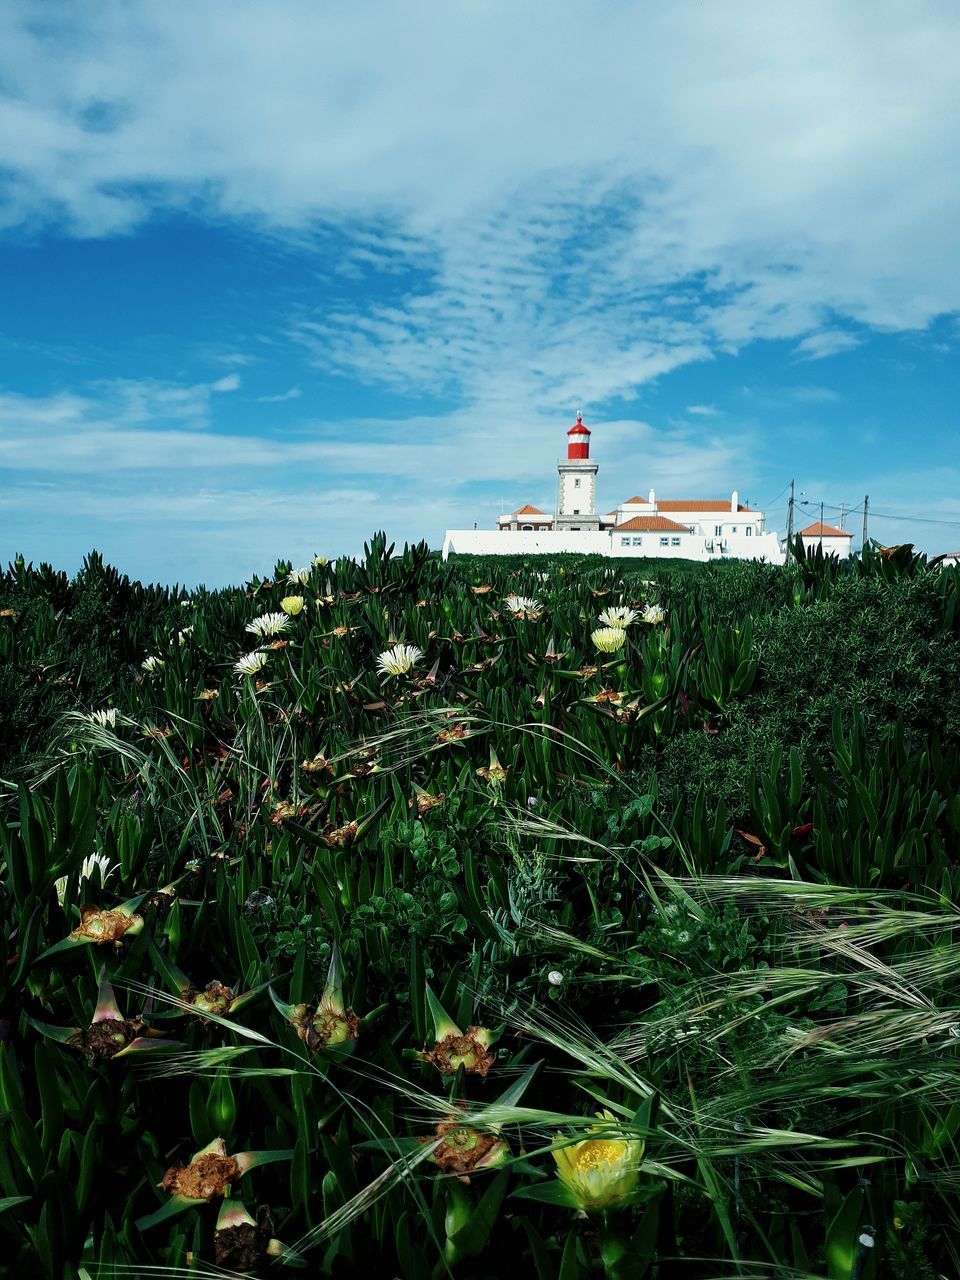 sky, plant, lighthouse, cloud, nature, grass, architecture, land, flower, built structure, tower, green, building exterior, guidance, rural area, growth, sea, coast, building, field, outdoors, horizon, landscape, day, beauty in nature, environment, hill, agriculture, no people, security, protection, water, scenics - nature, sunlight, tranquility